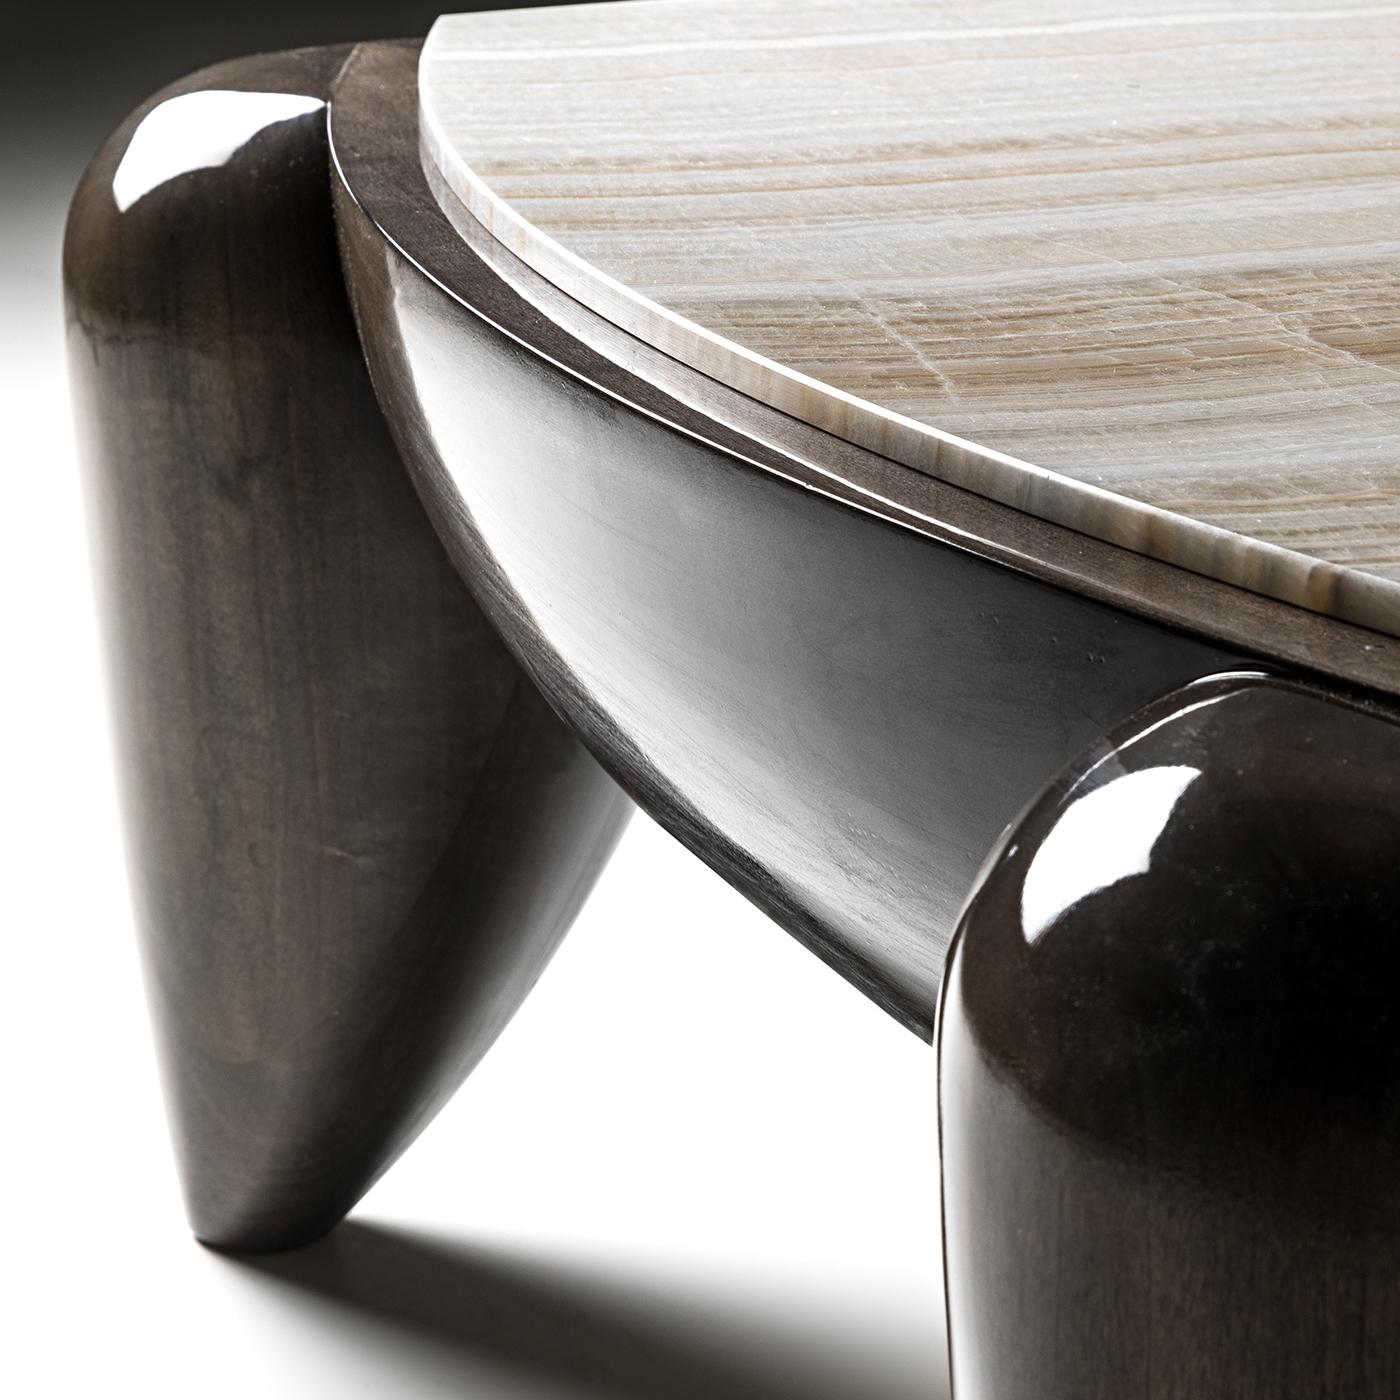 Glossy eucalyptus and prized ivory onyx distinguish the outstanding aesthetic of this elegant coffee table. Delicate and charming, its smooth silhouette showcases a glossy frame in solid eucalyptus with a sophisticated onyx top with convex sides.